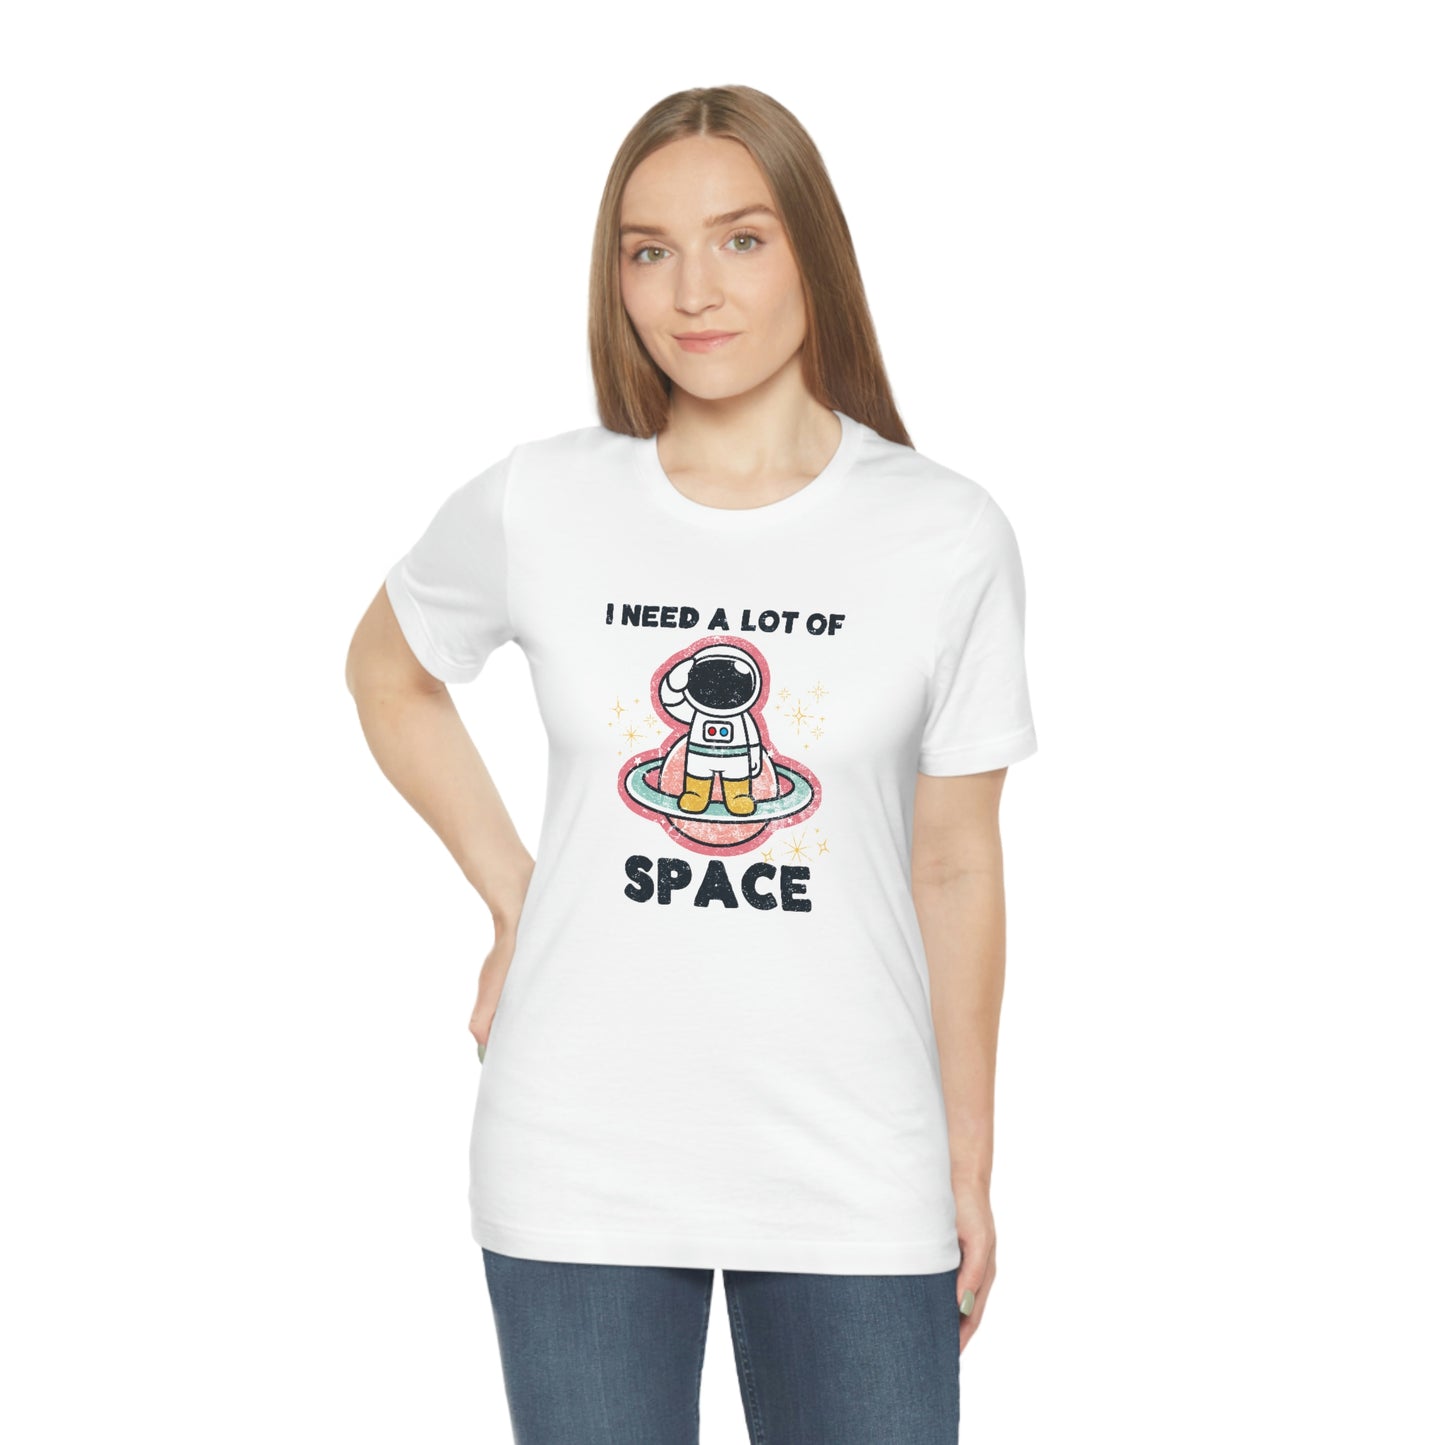 "I need a lot of Space" Bella Canvas Unisex Jersey Short Sleeve Tee